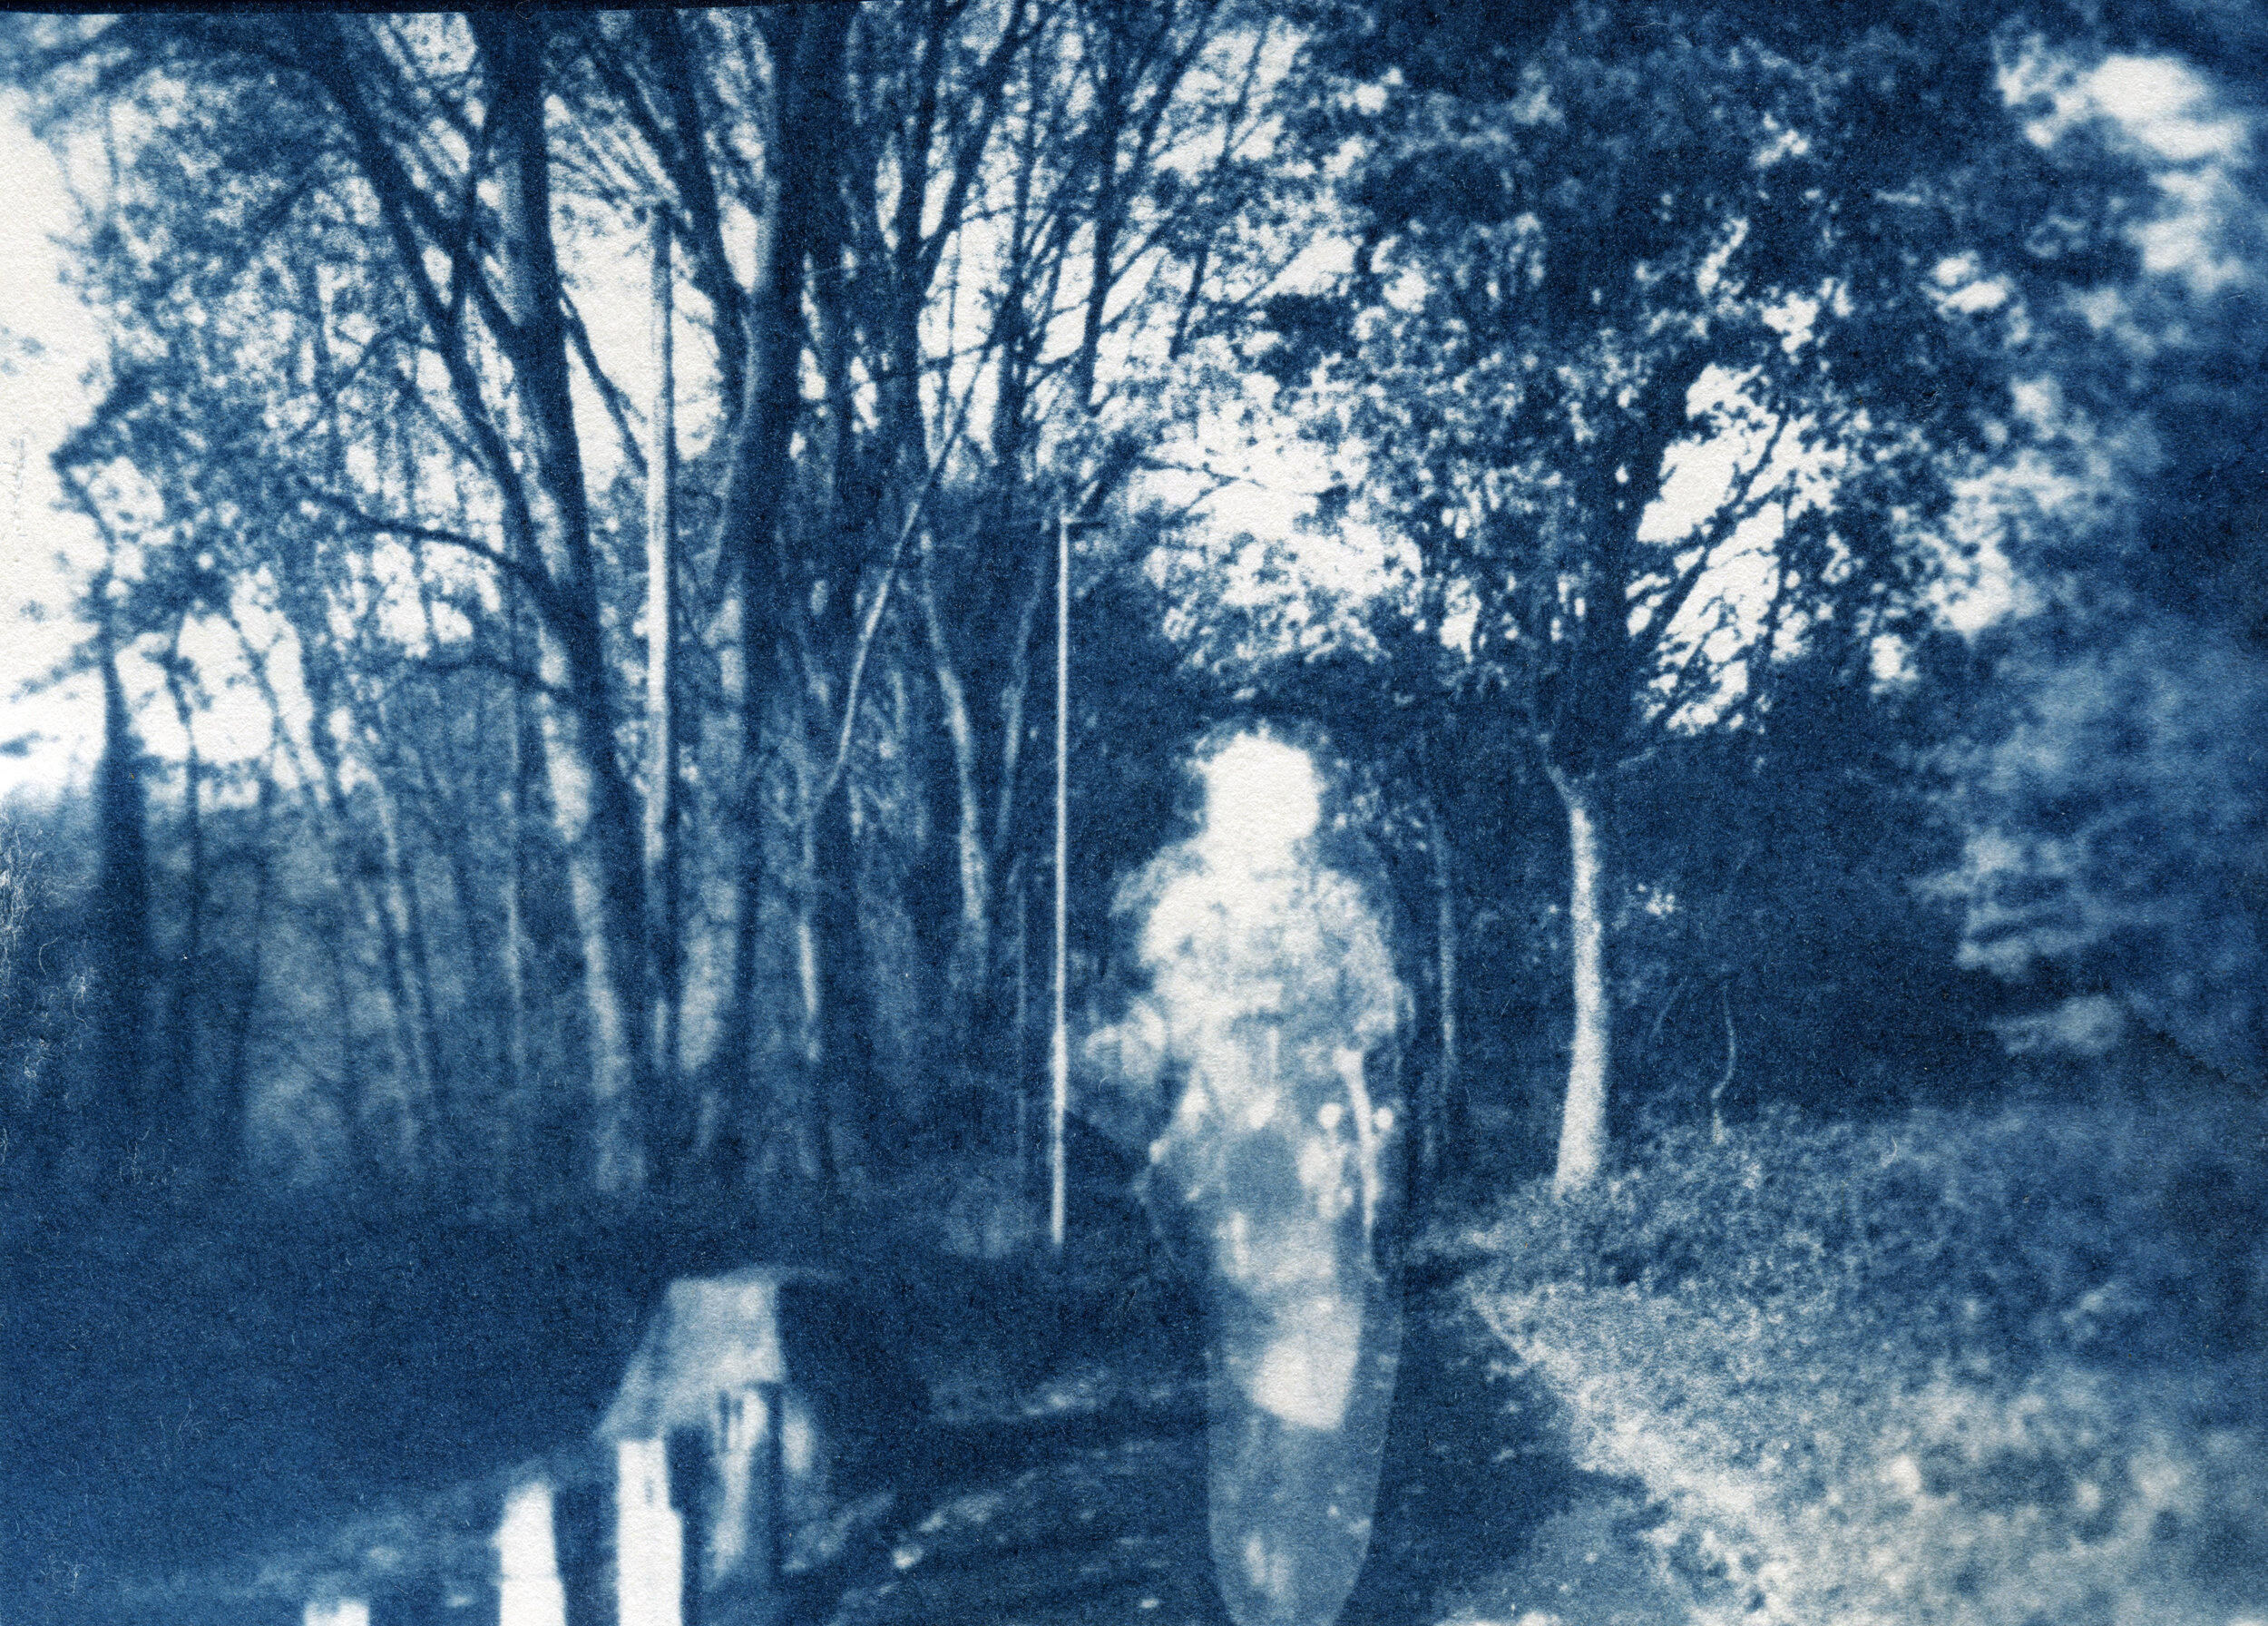 The peoples river project_participant Louie's cyanotype 2020.jpg